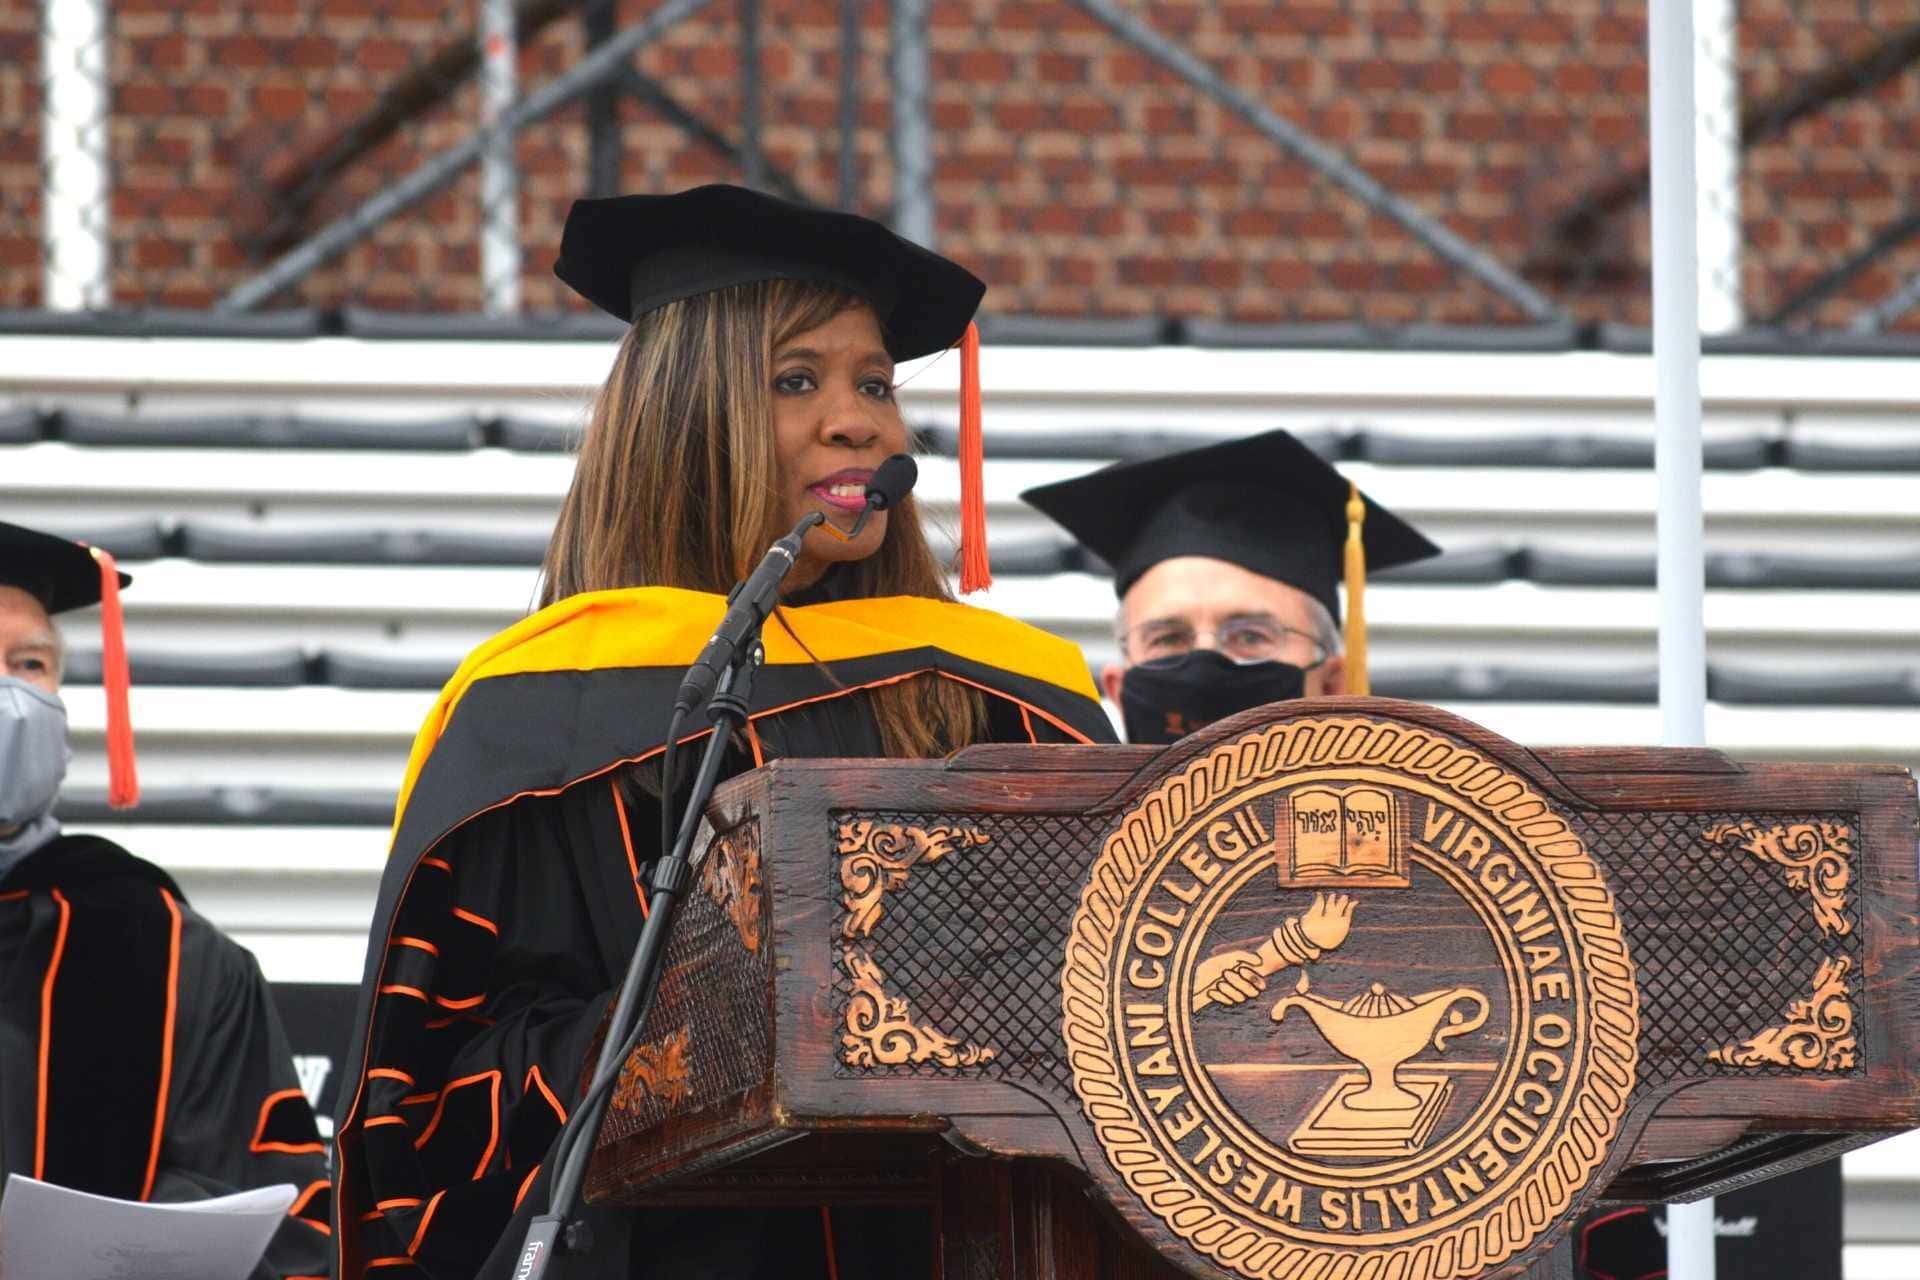 Dr. Patrice Harris delivers the commencement address at West Virginia Wesleyan College Sunday. Harris was the first Black woman to serve as president of the American Medical Association and received a Doctor of Humane Letters as an honorary degree. Nearly 200 students received their diplomas during the ceremony held outside on Cebe Ross Field.